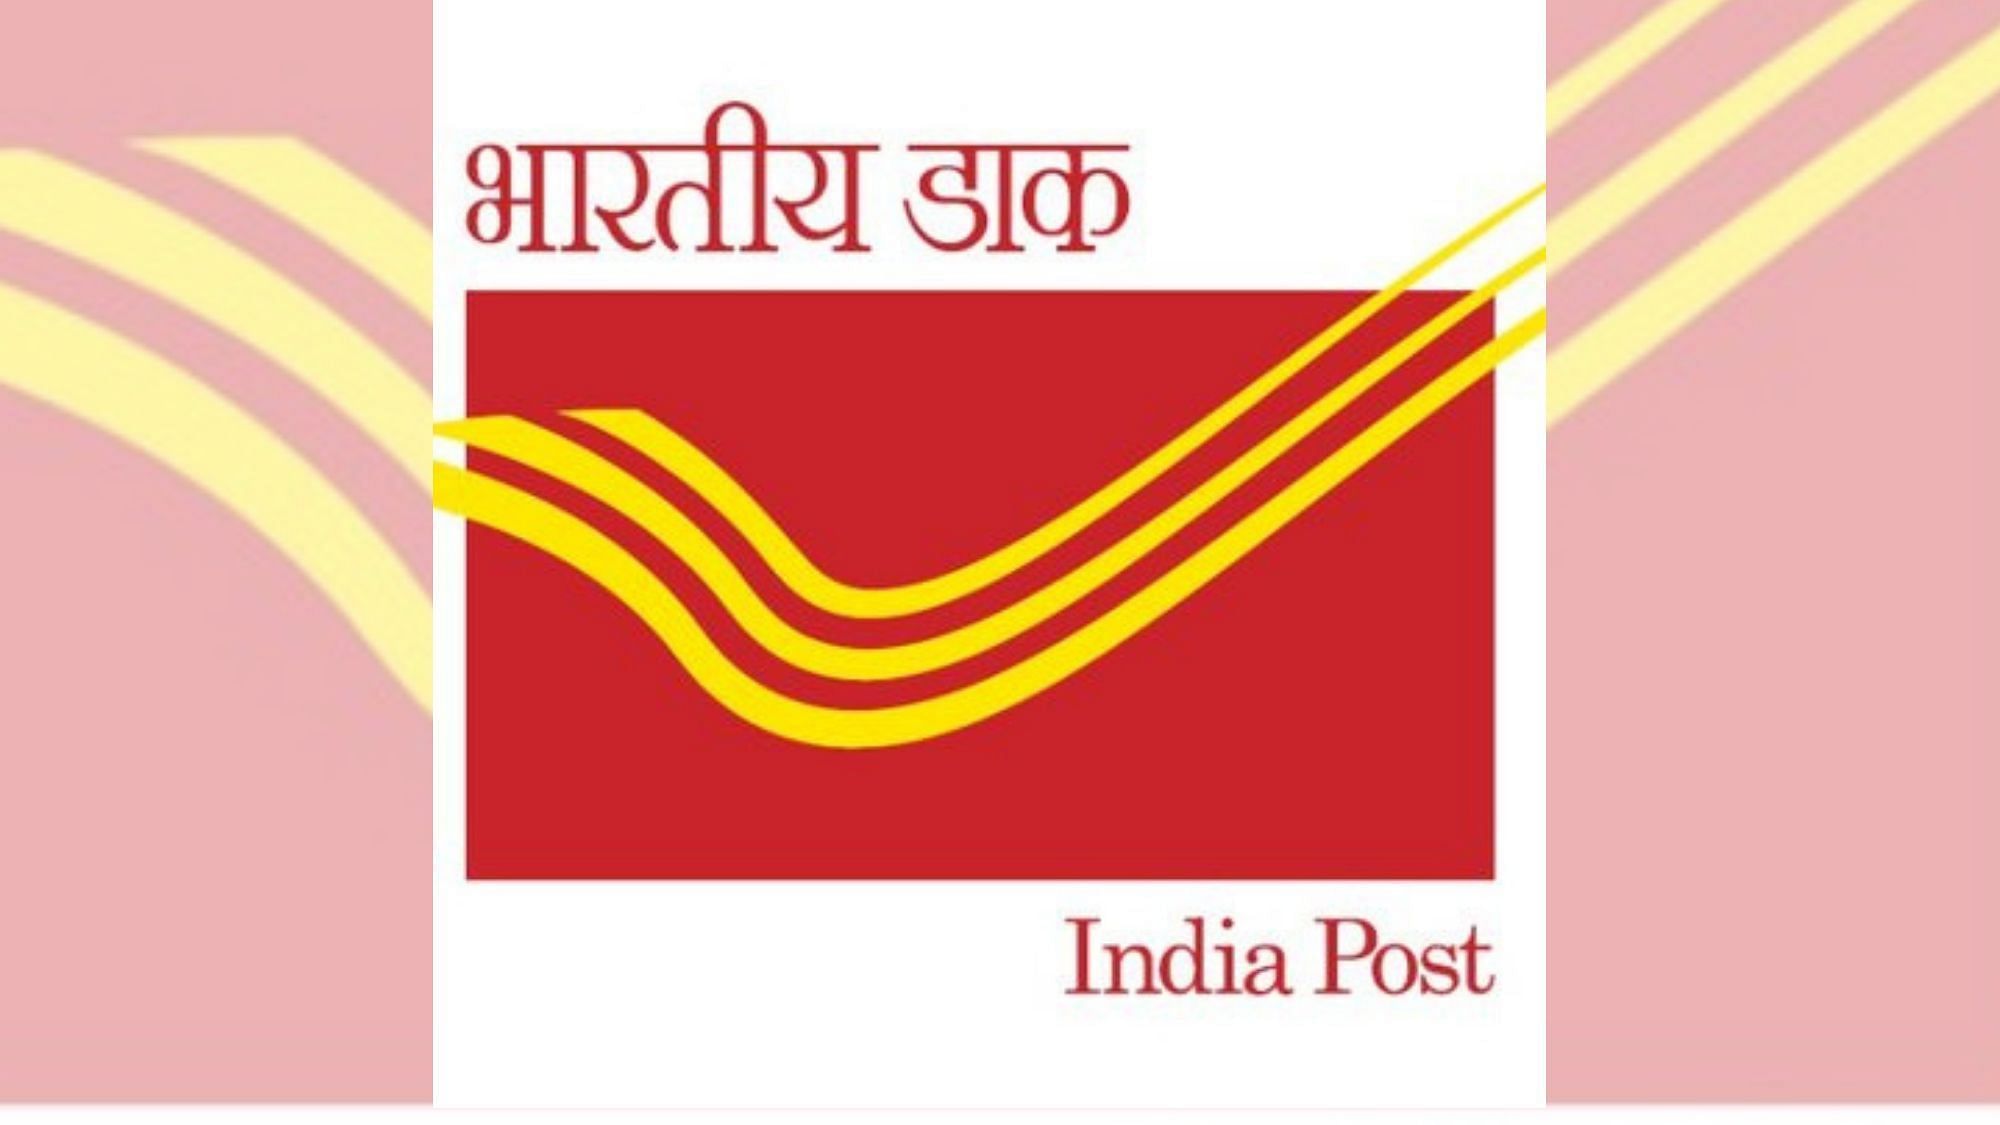 Few post office saving schemes can help investors with income tax benefits.